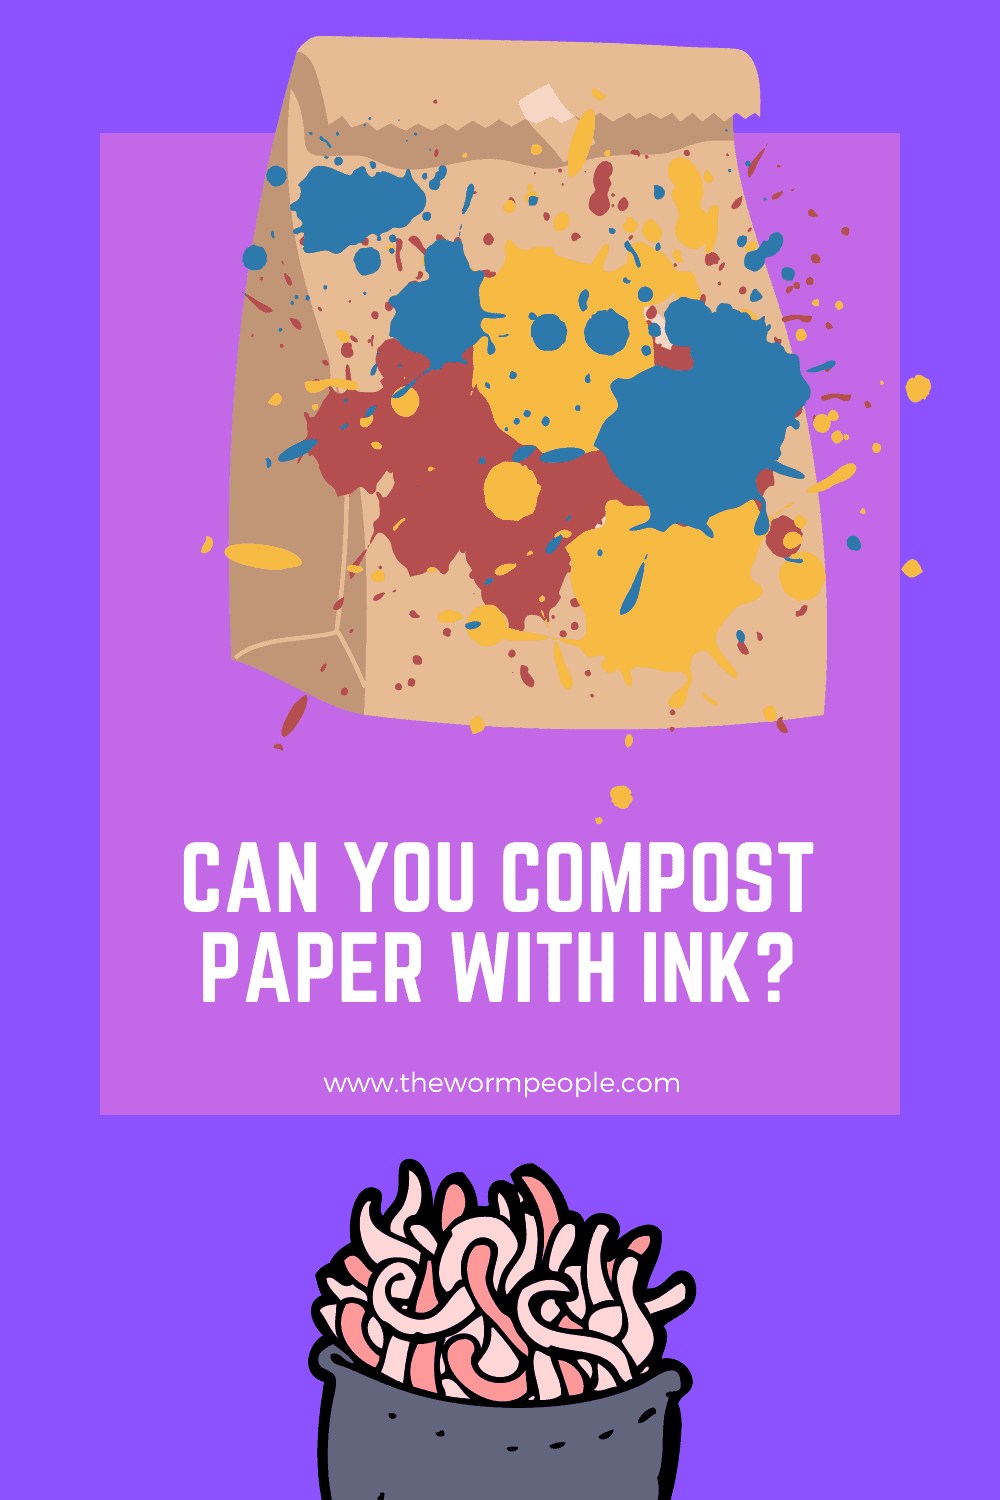 Can You Compost Paper with Ink?